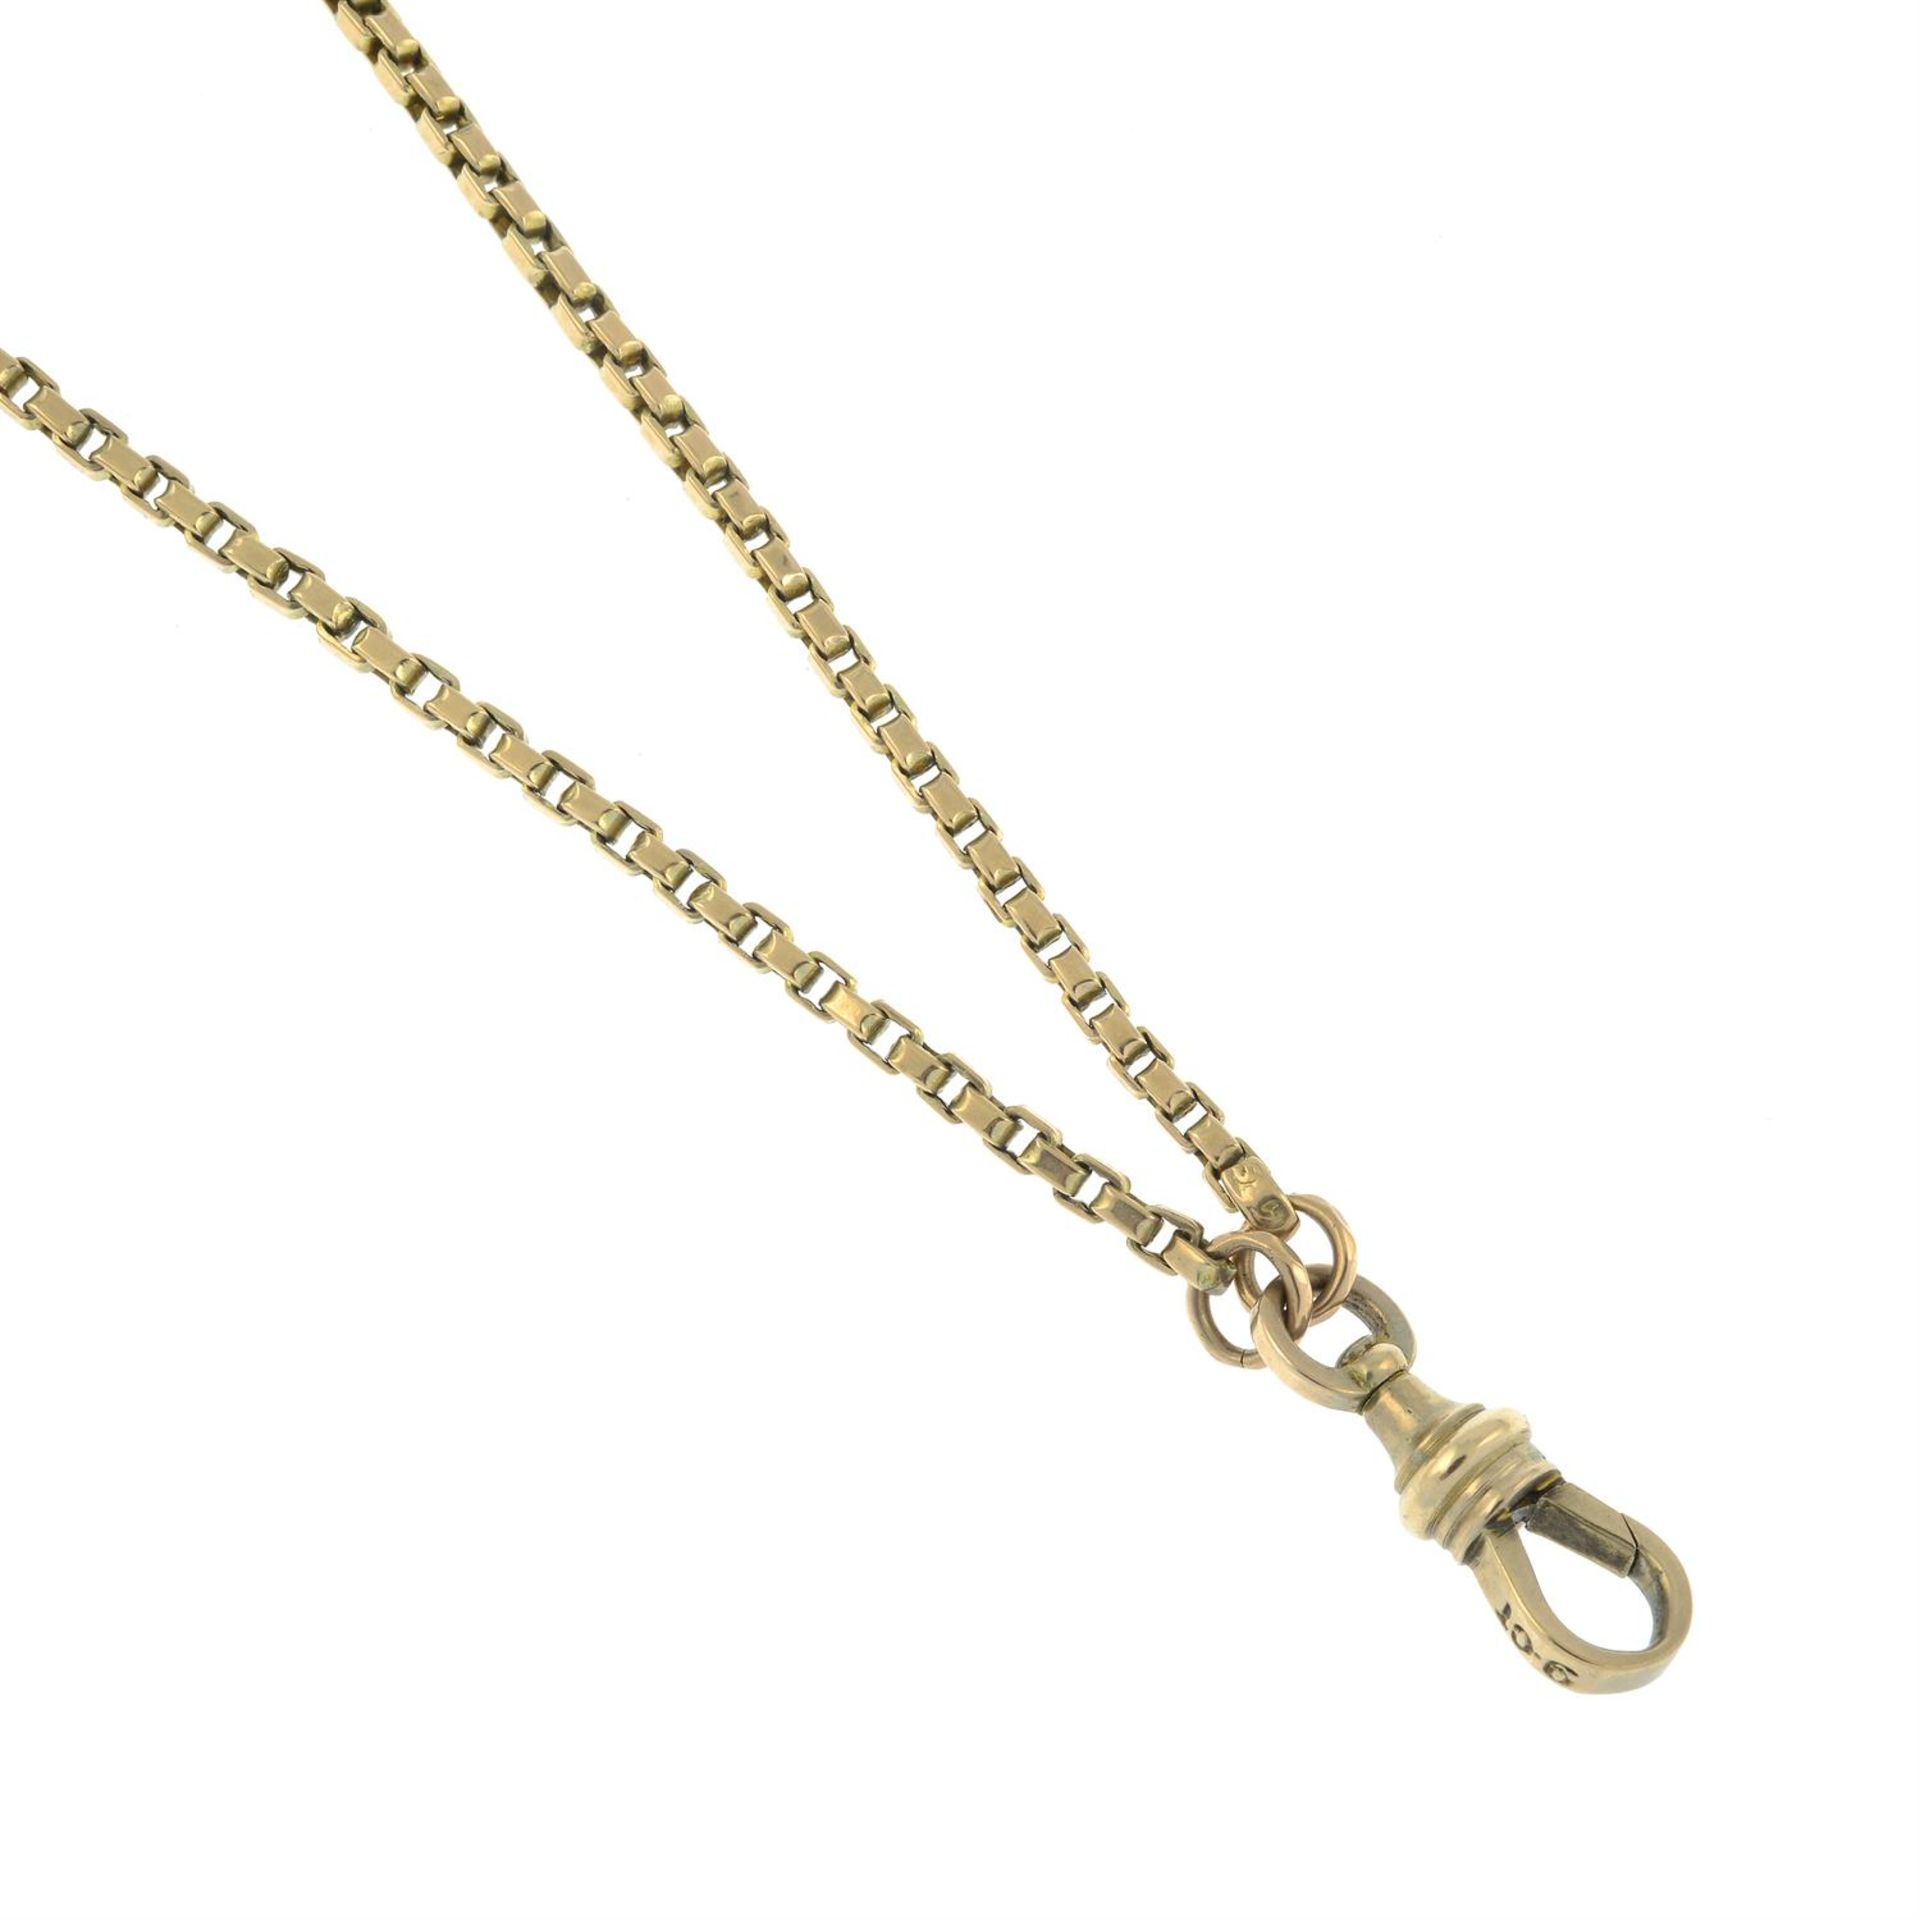 An early 20th century 9ct gold longuard chain. - Image 2 of 2